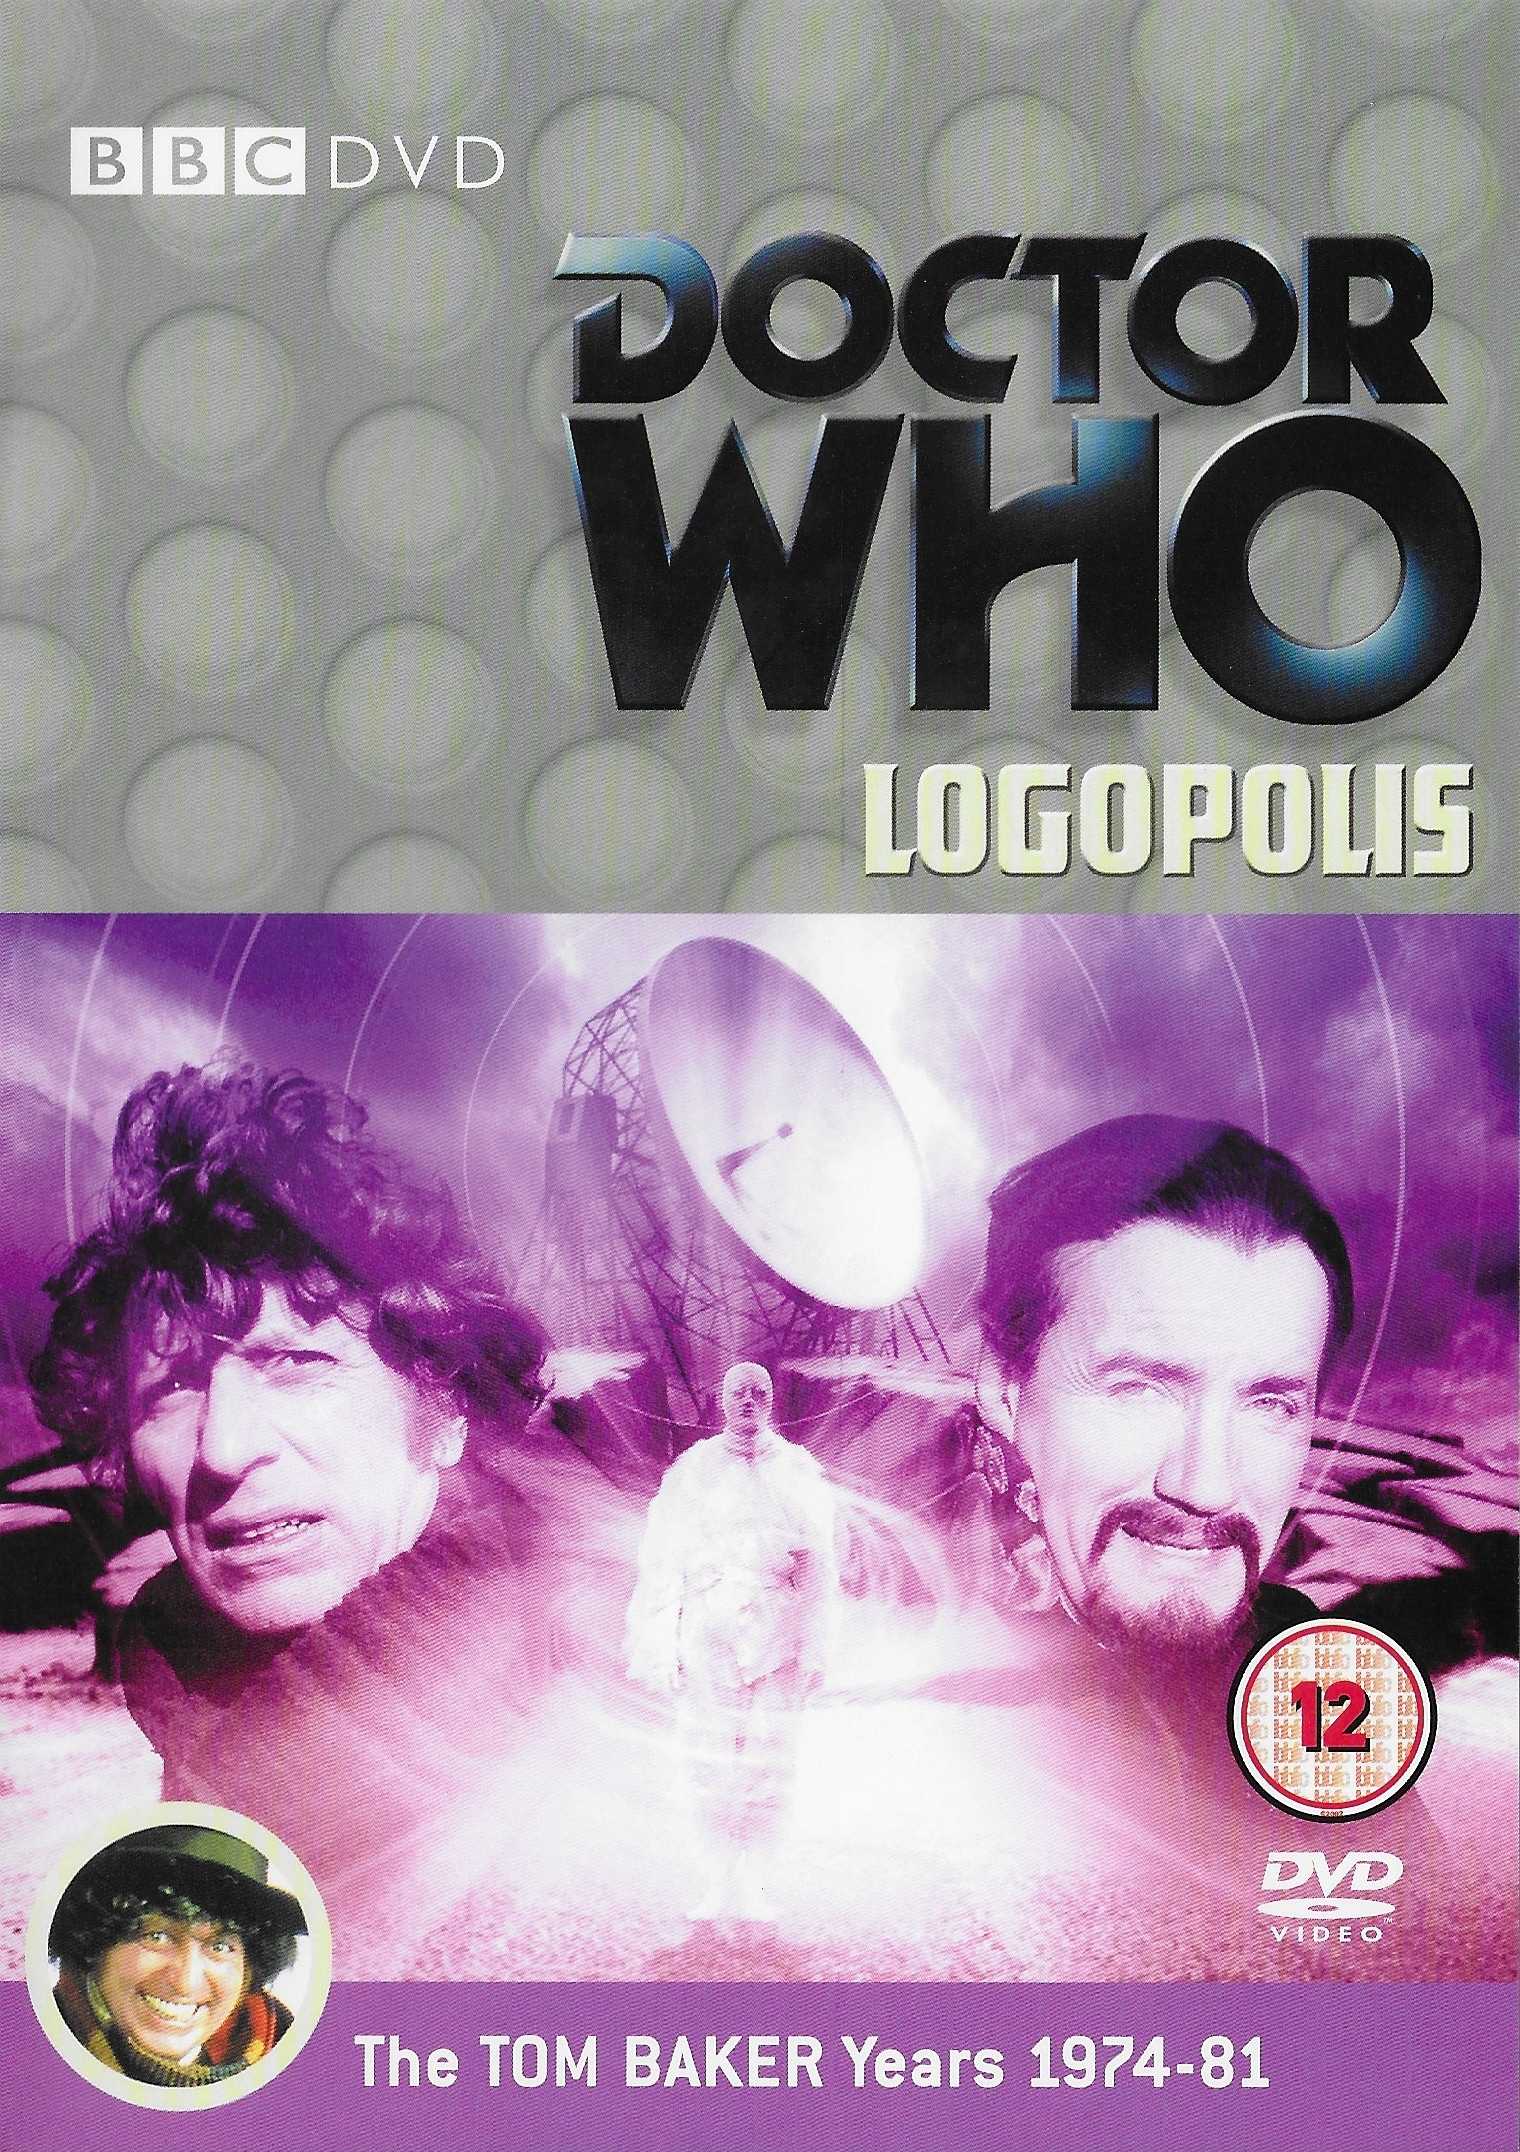 Picture of BBCDVD 1331B Doctor Who - Logopolis by artist Johnny Byrne from the BBC dvds - Records and Tapes library